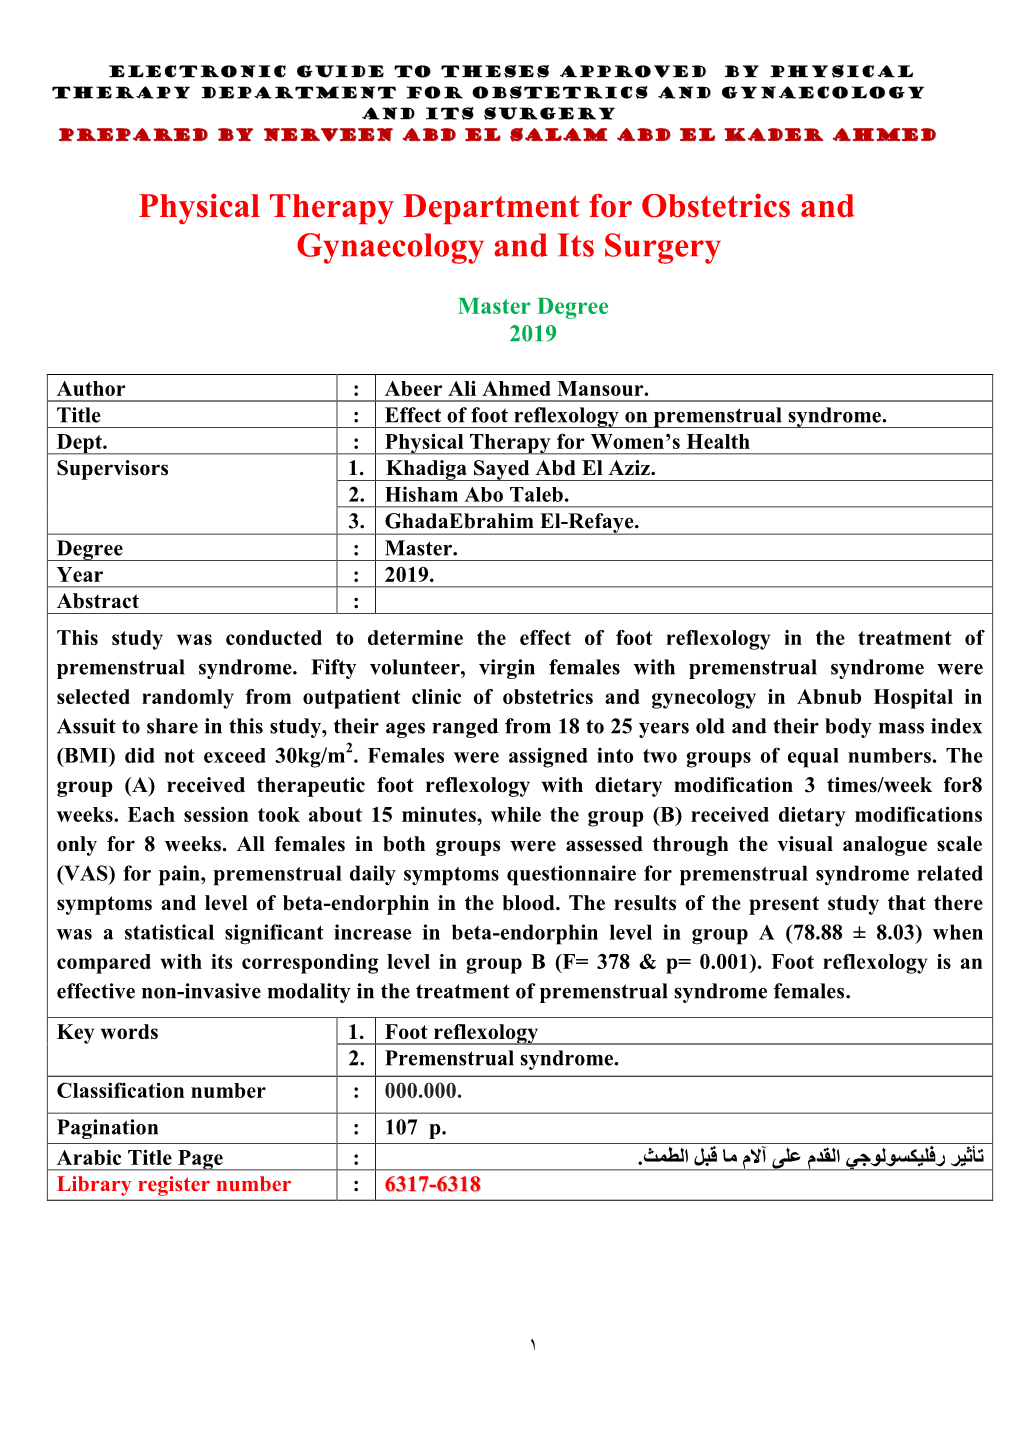 PHYSICAL THERAPY DEPARTMENT for OBSTETRICS and GYNAECOLOGY and ITS SURGERY Prepared by Nerveen Abd El Salam Abd El Kader Ahmed